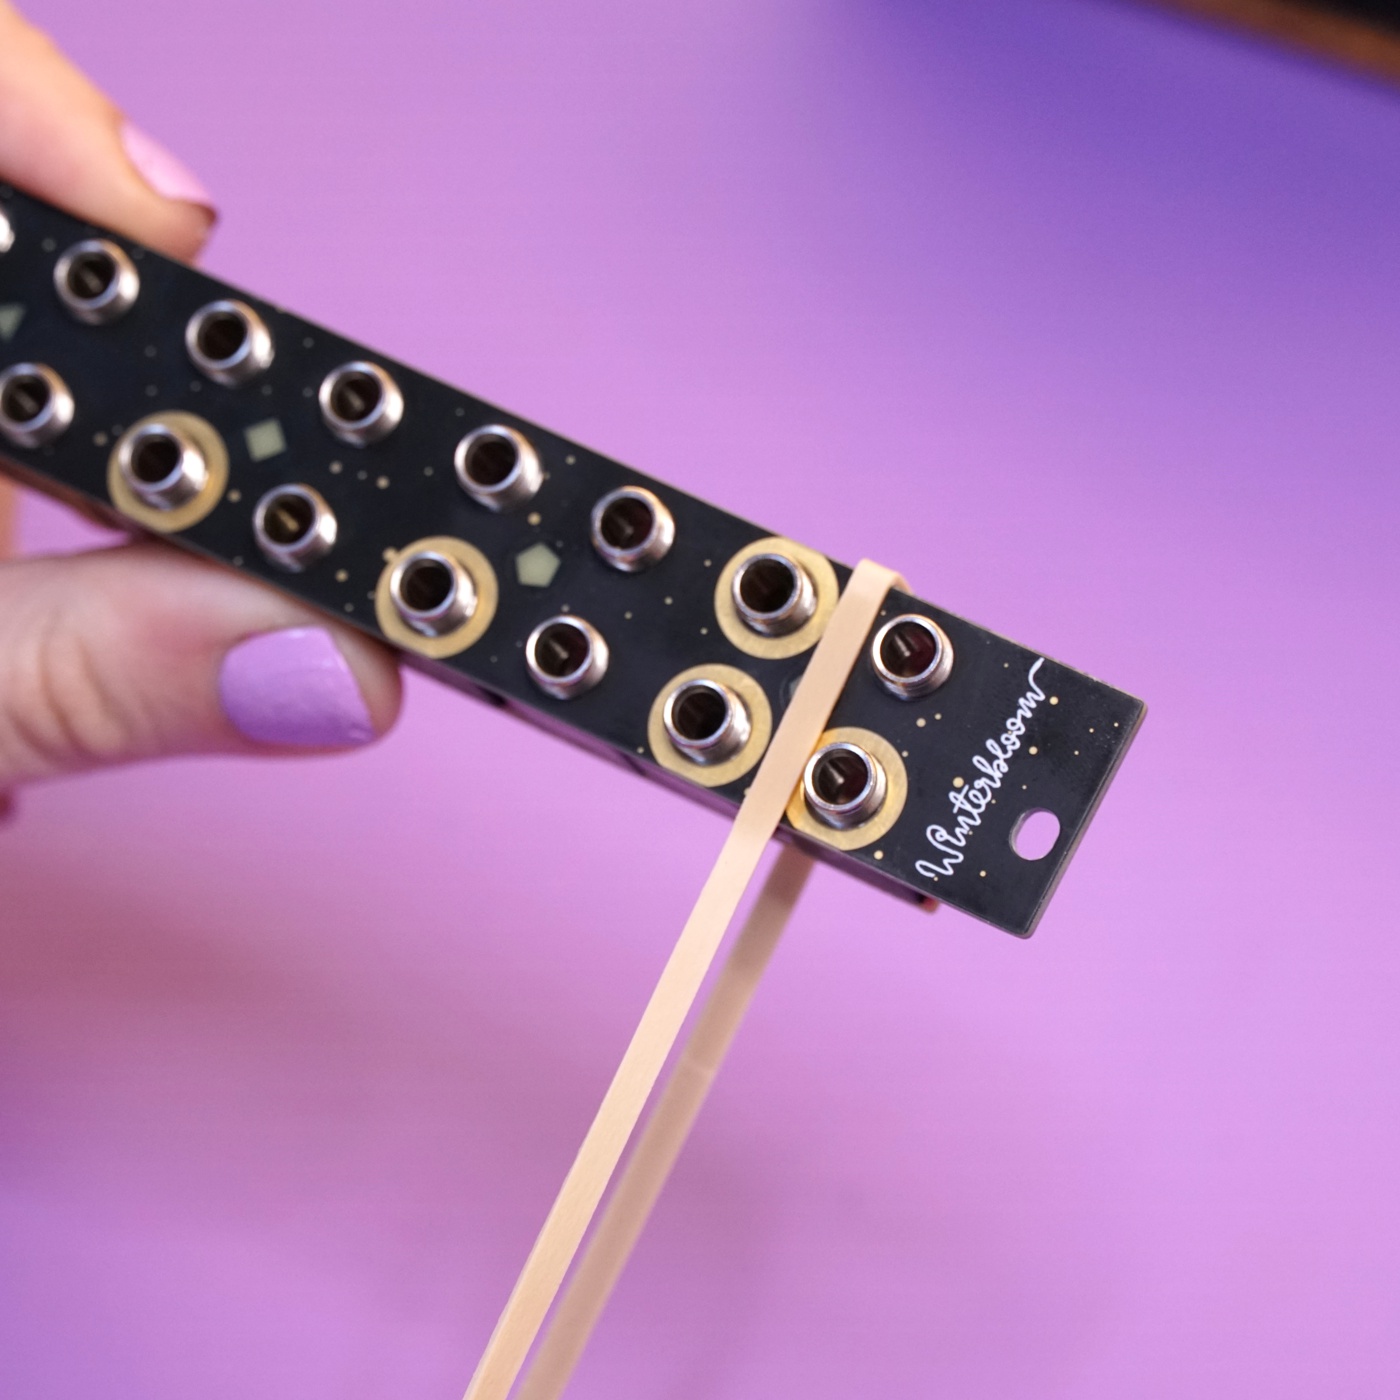 A rubber band being pulled taught over one side of the module